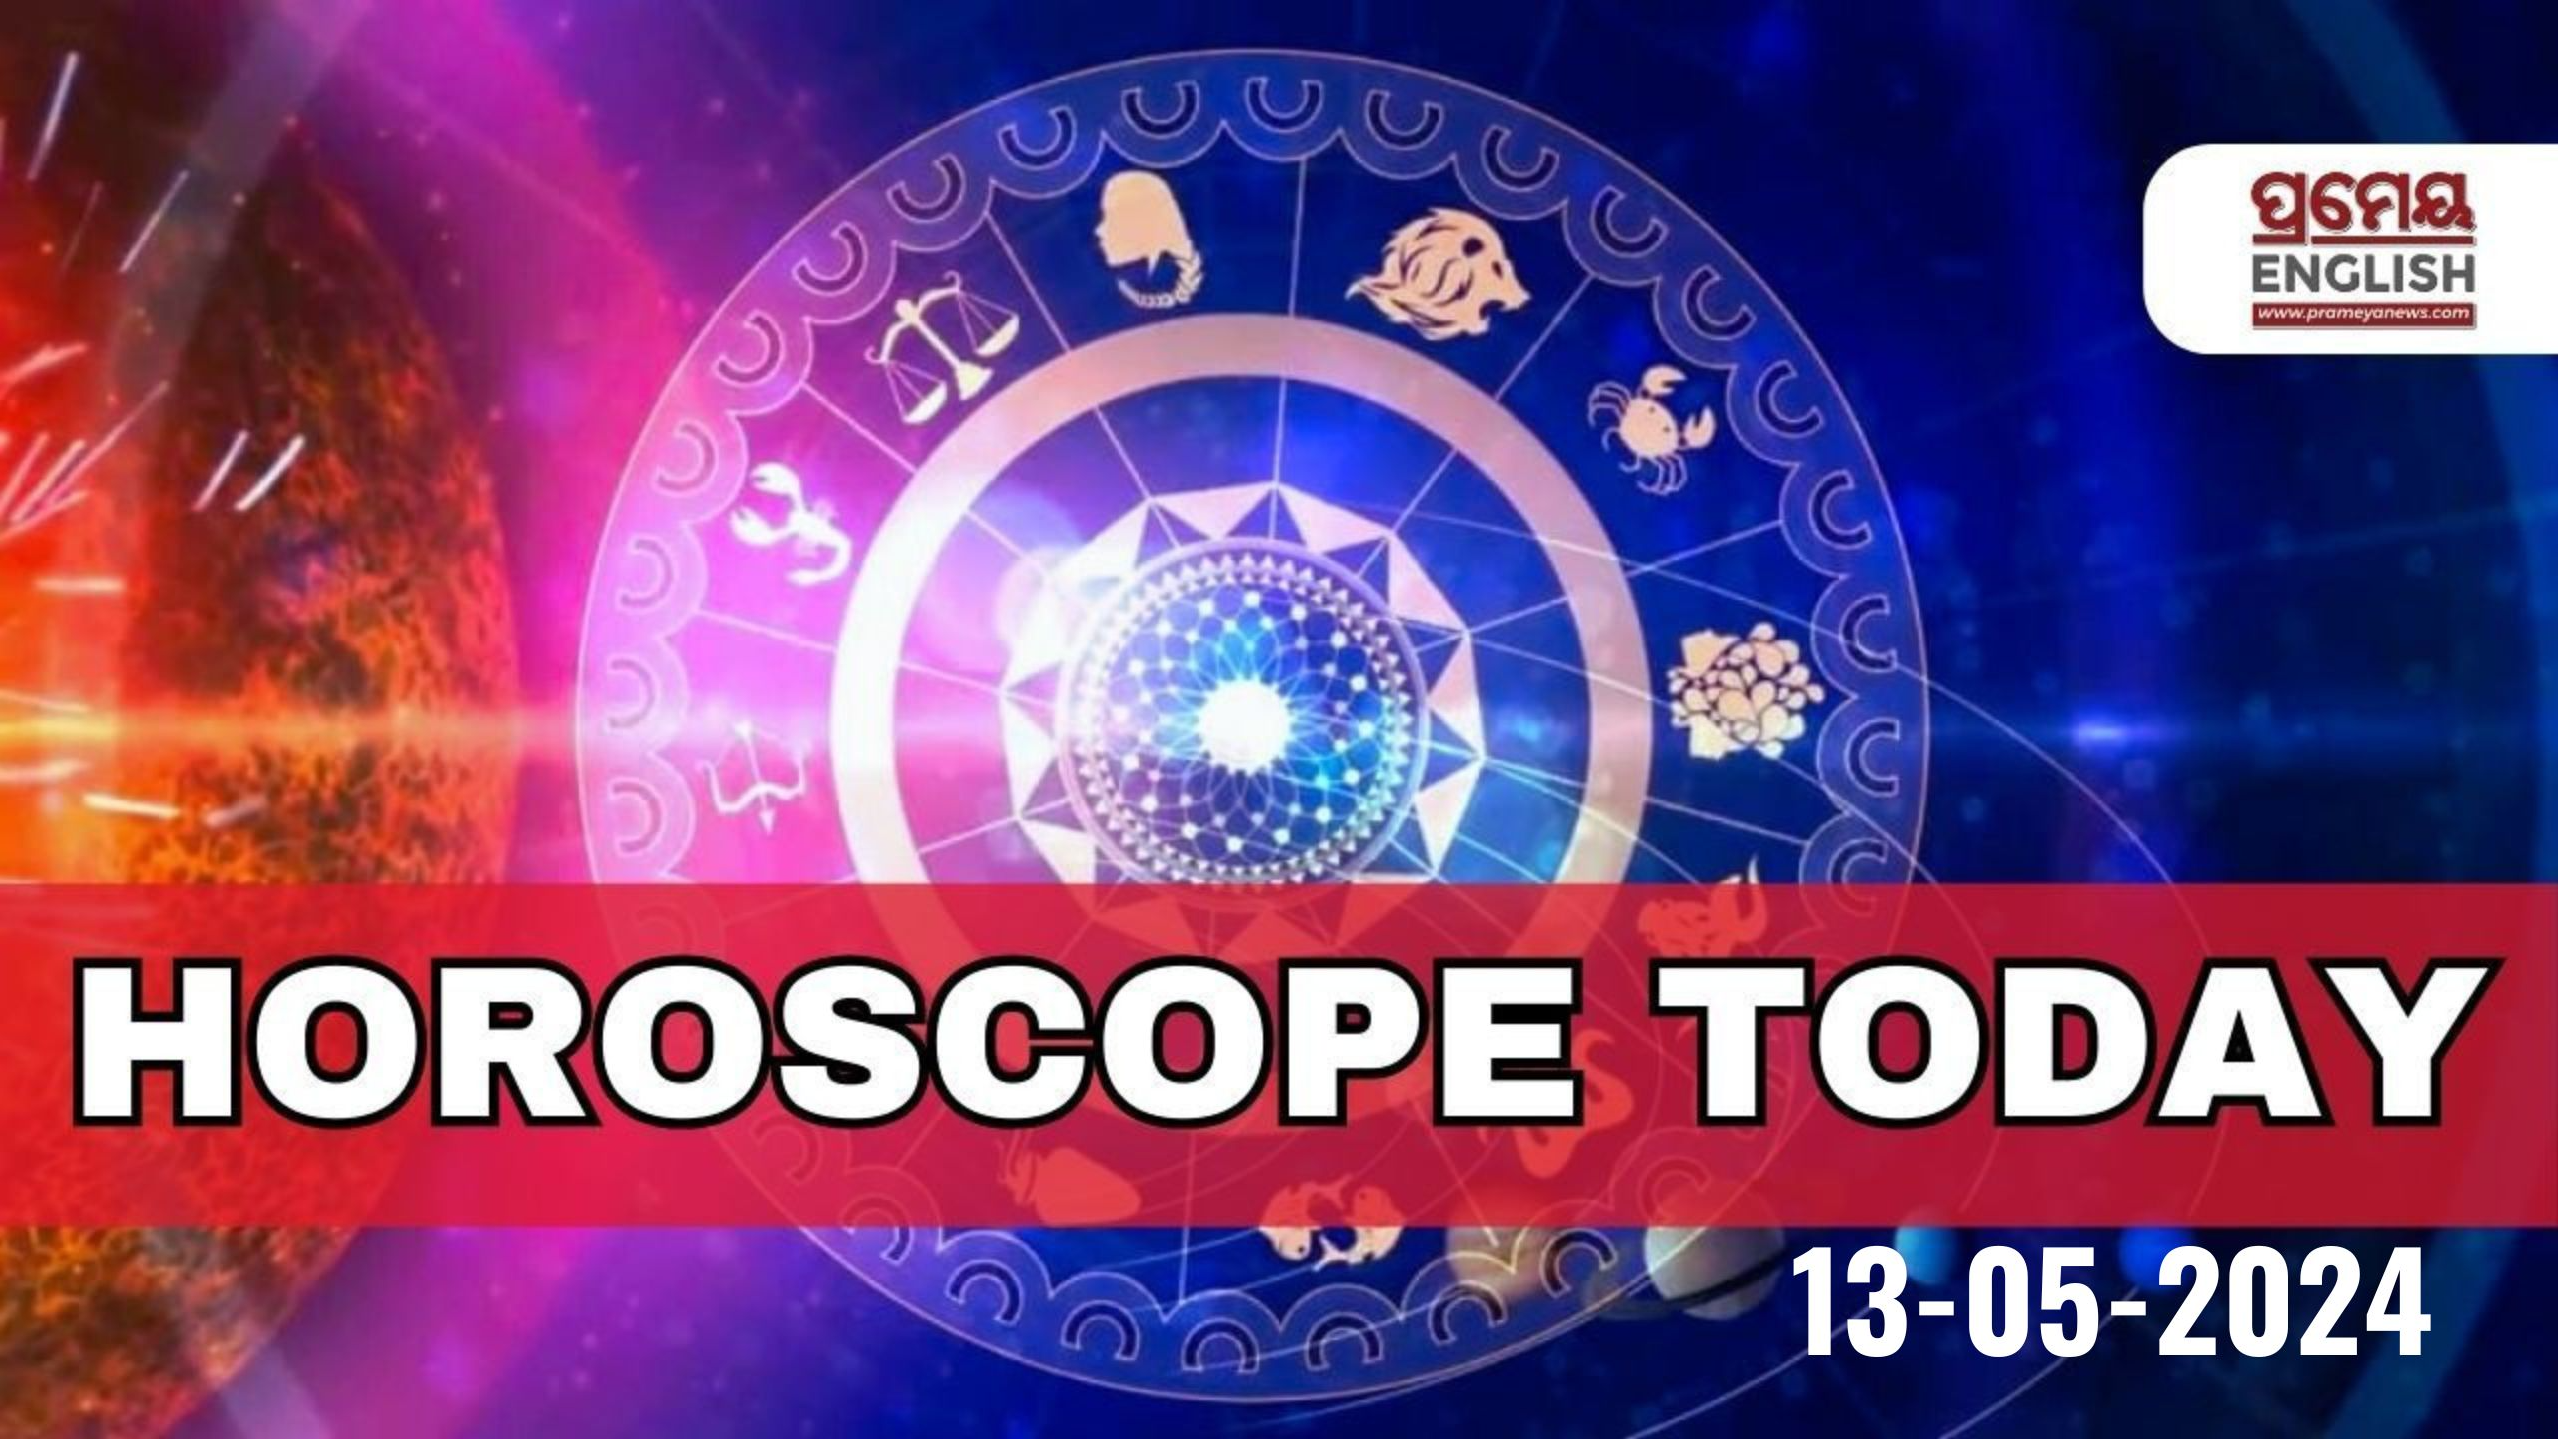 Horoscope Today: Astrological prediction for May 2, 2024